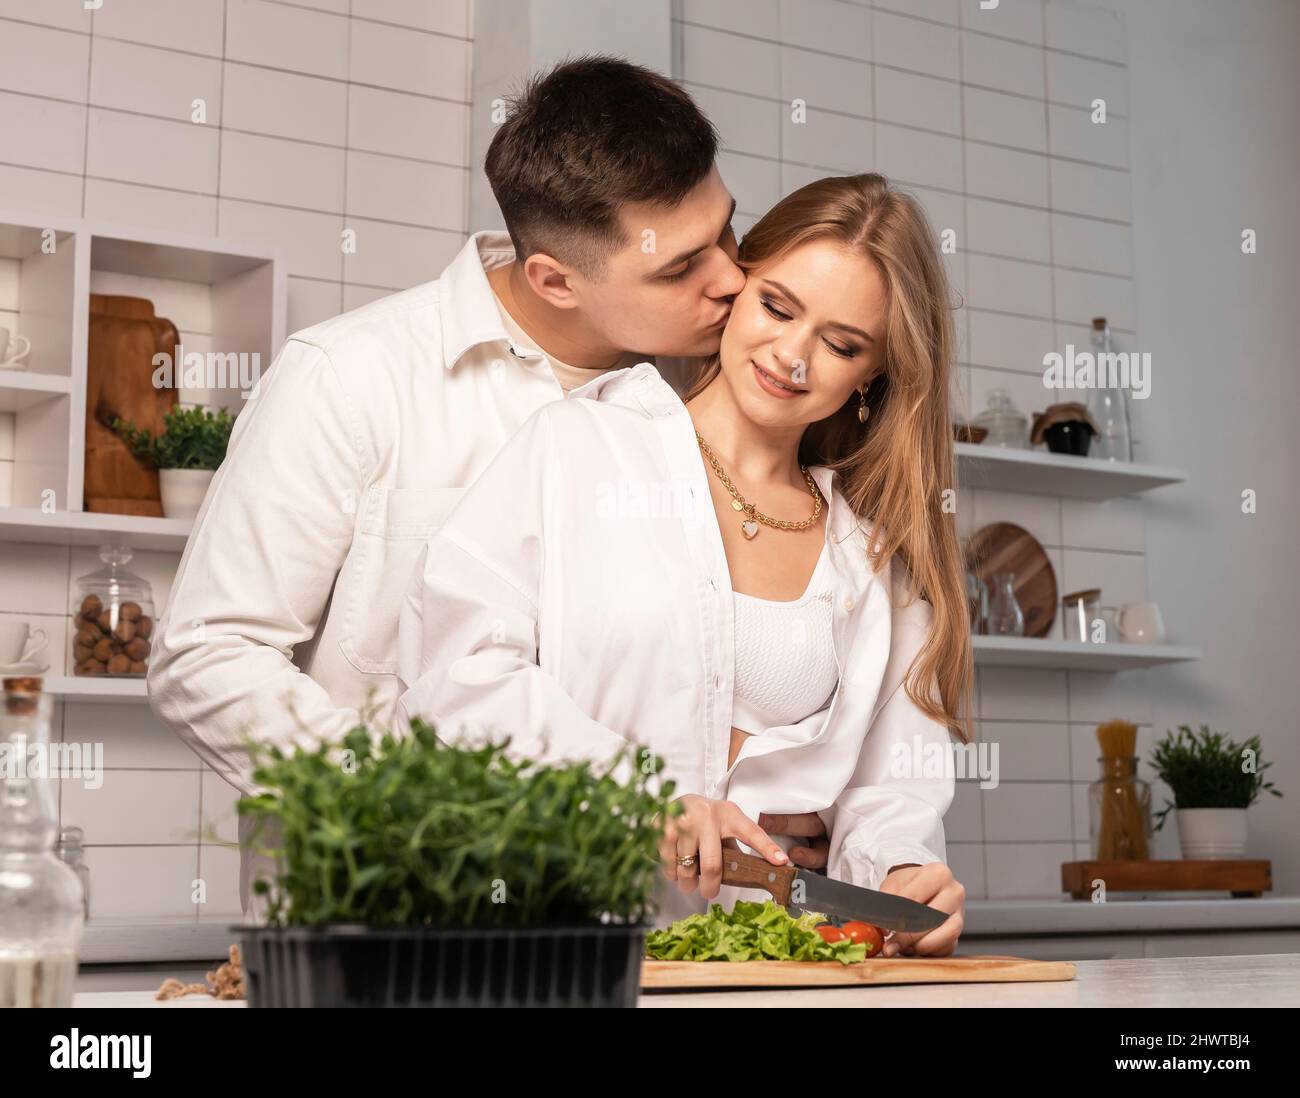 Romantic couple cooking together. Handsome man kissing his wife or girlfriend while woman cutting tomatoes for vegetables salad. High quality photo Stock Photo